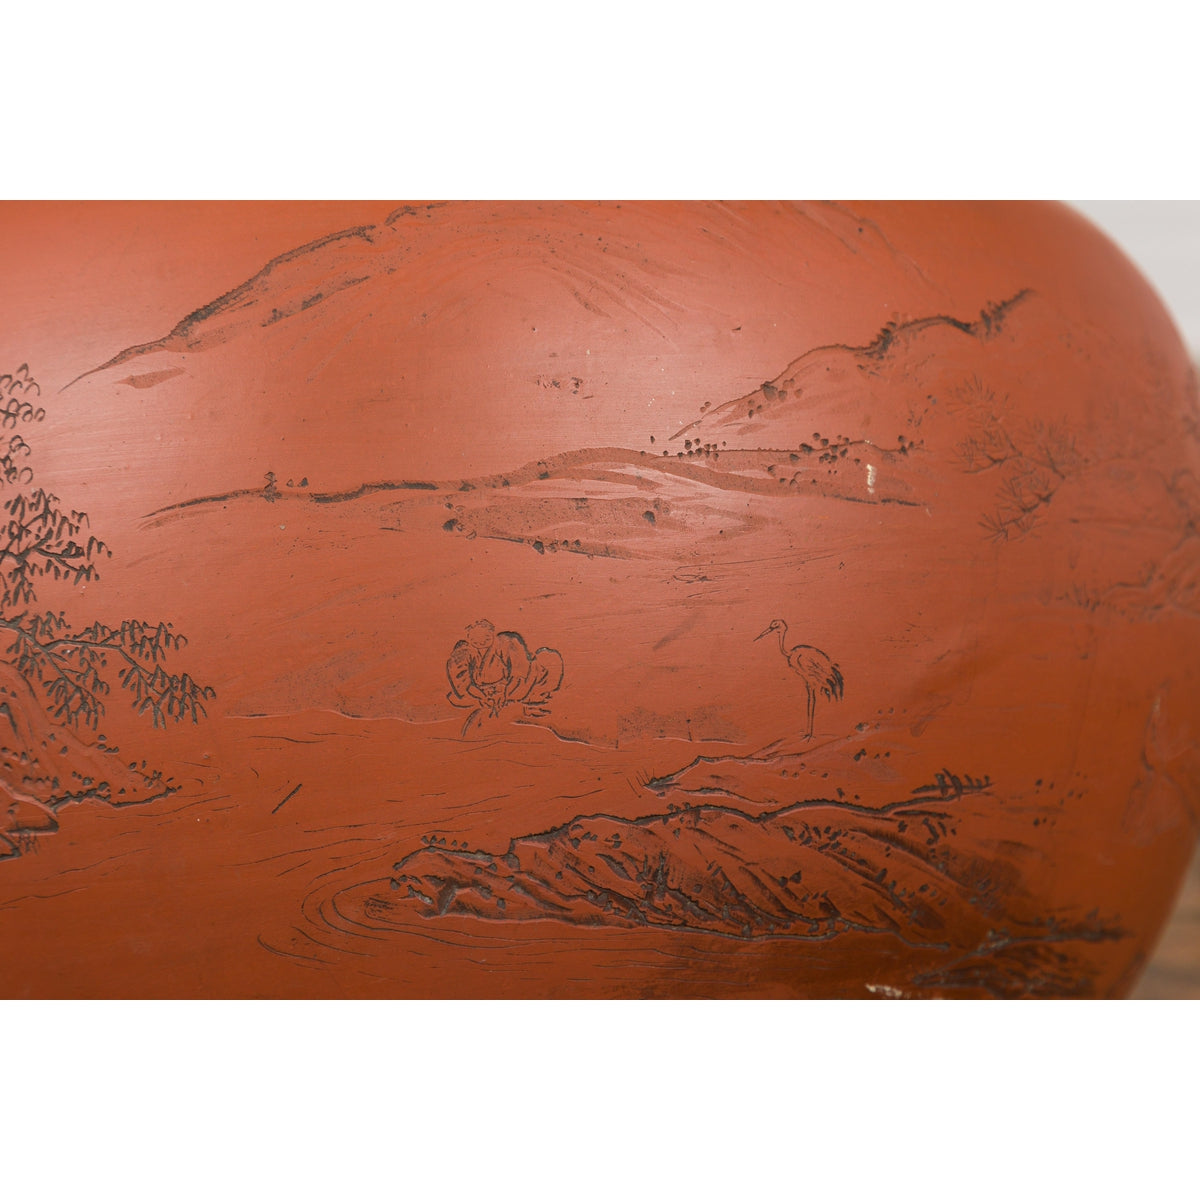 Orange Circular Antique Planter with Etched Design-YN7819-15. Asian & Chinese Furniture, Art, Antiques, Vintage Home Décor for sale at FEA Home